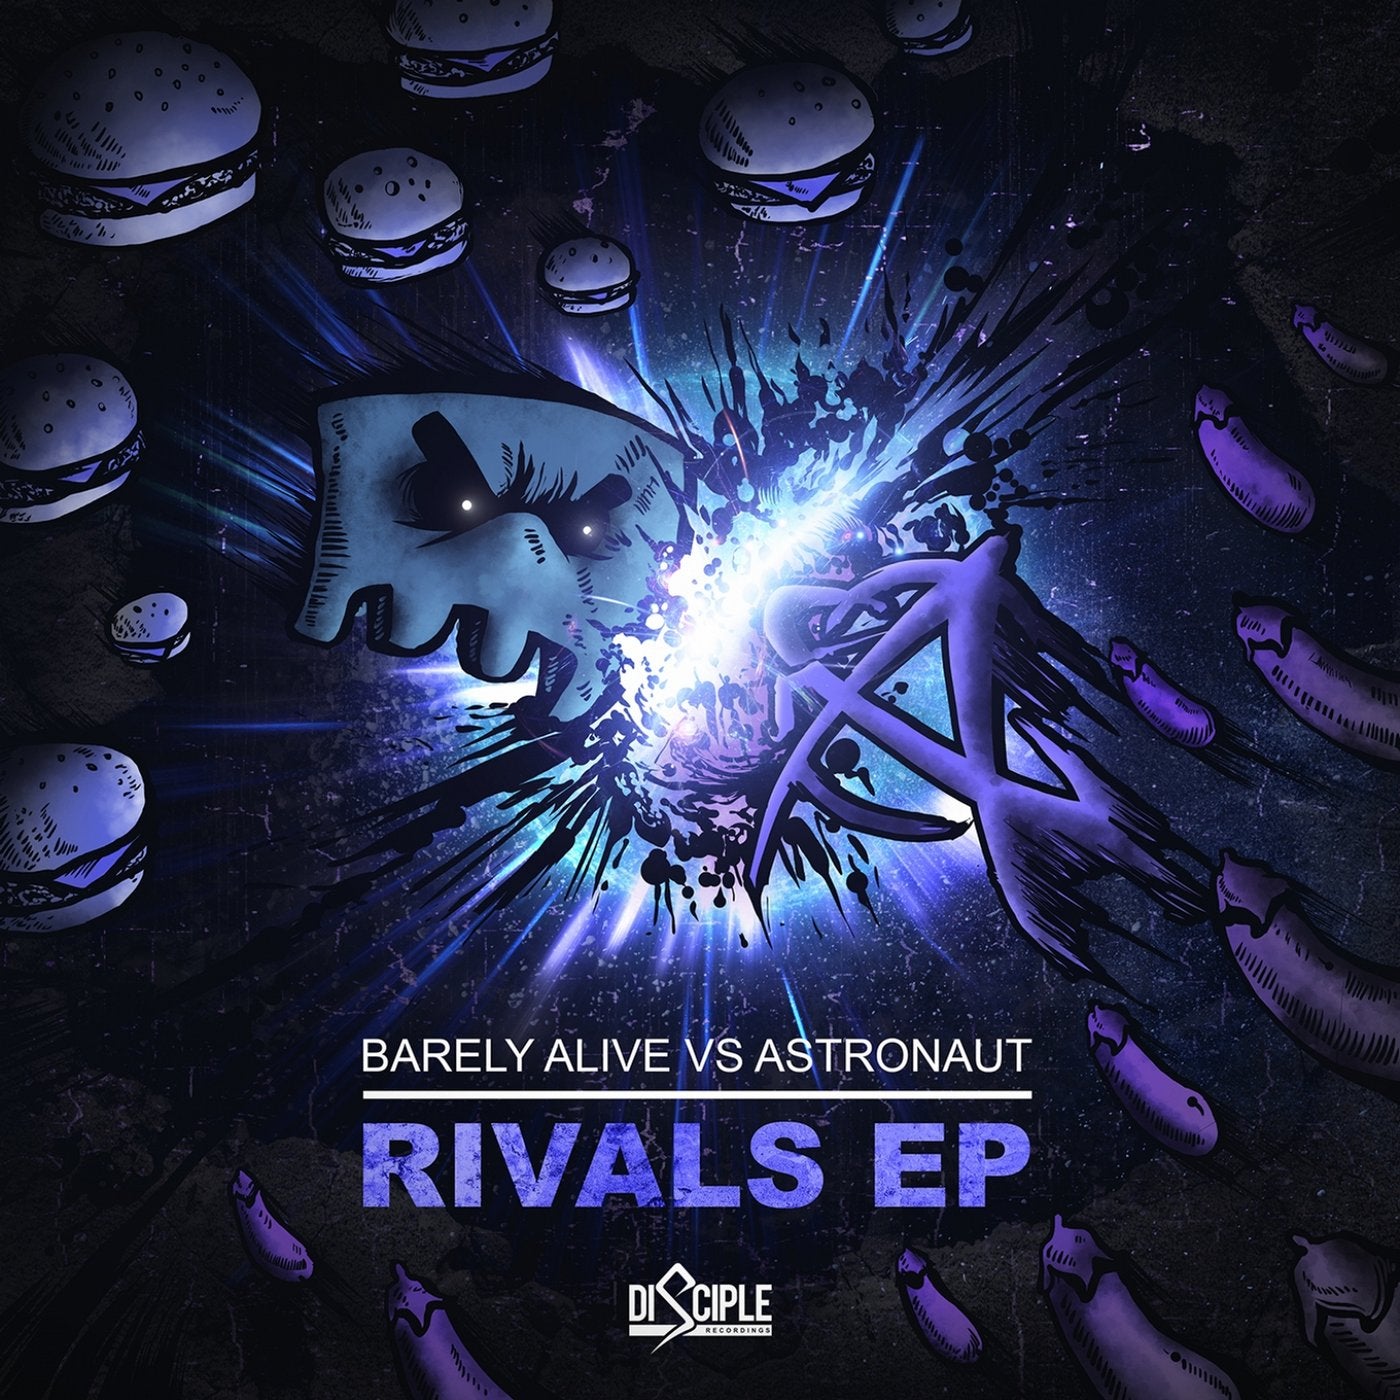 Rivals EP (Barely Alive & Astronaut)